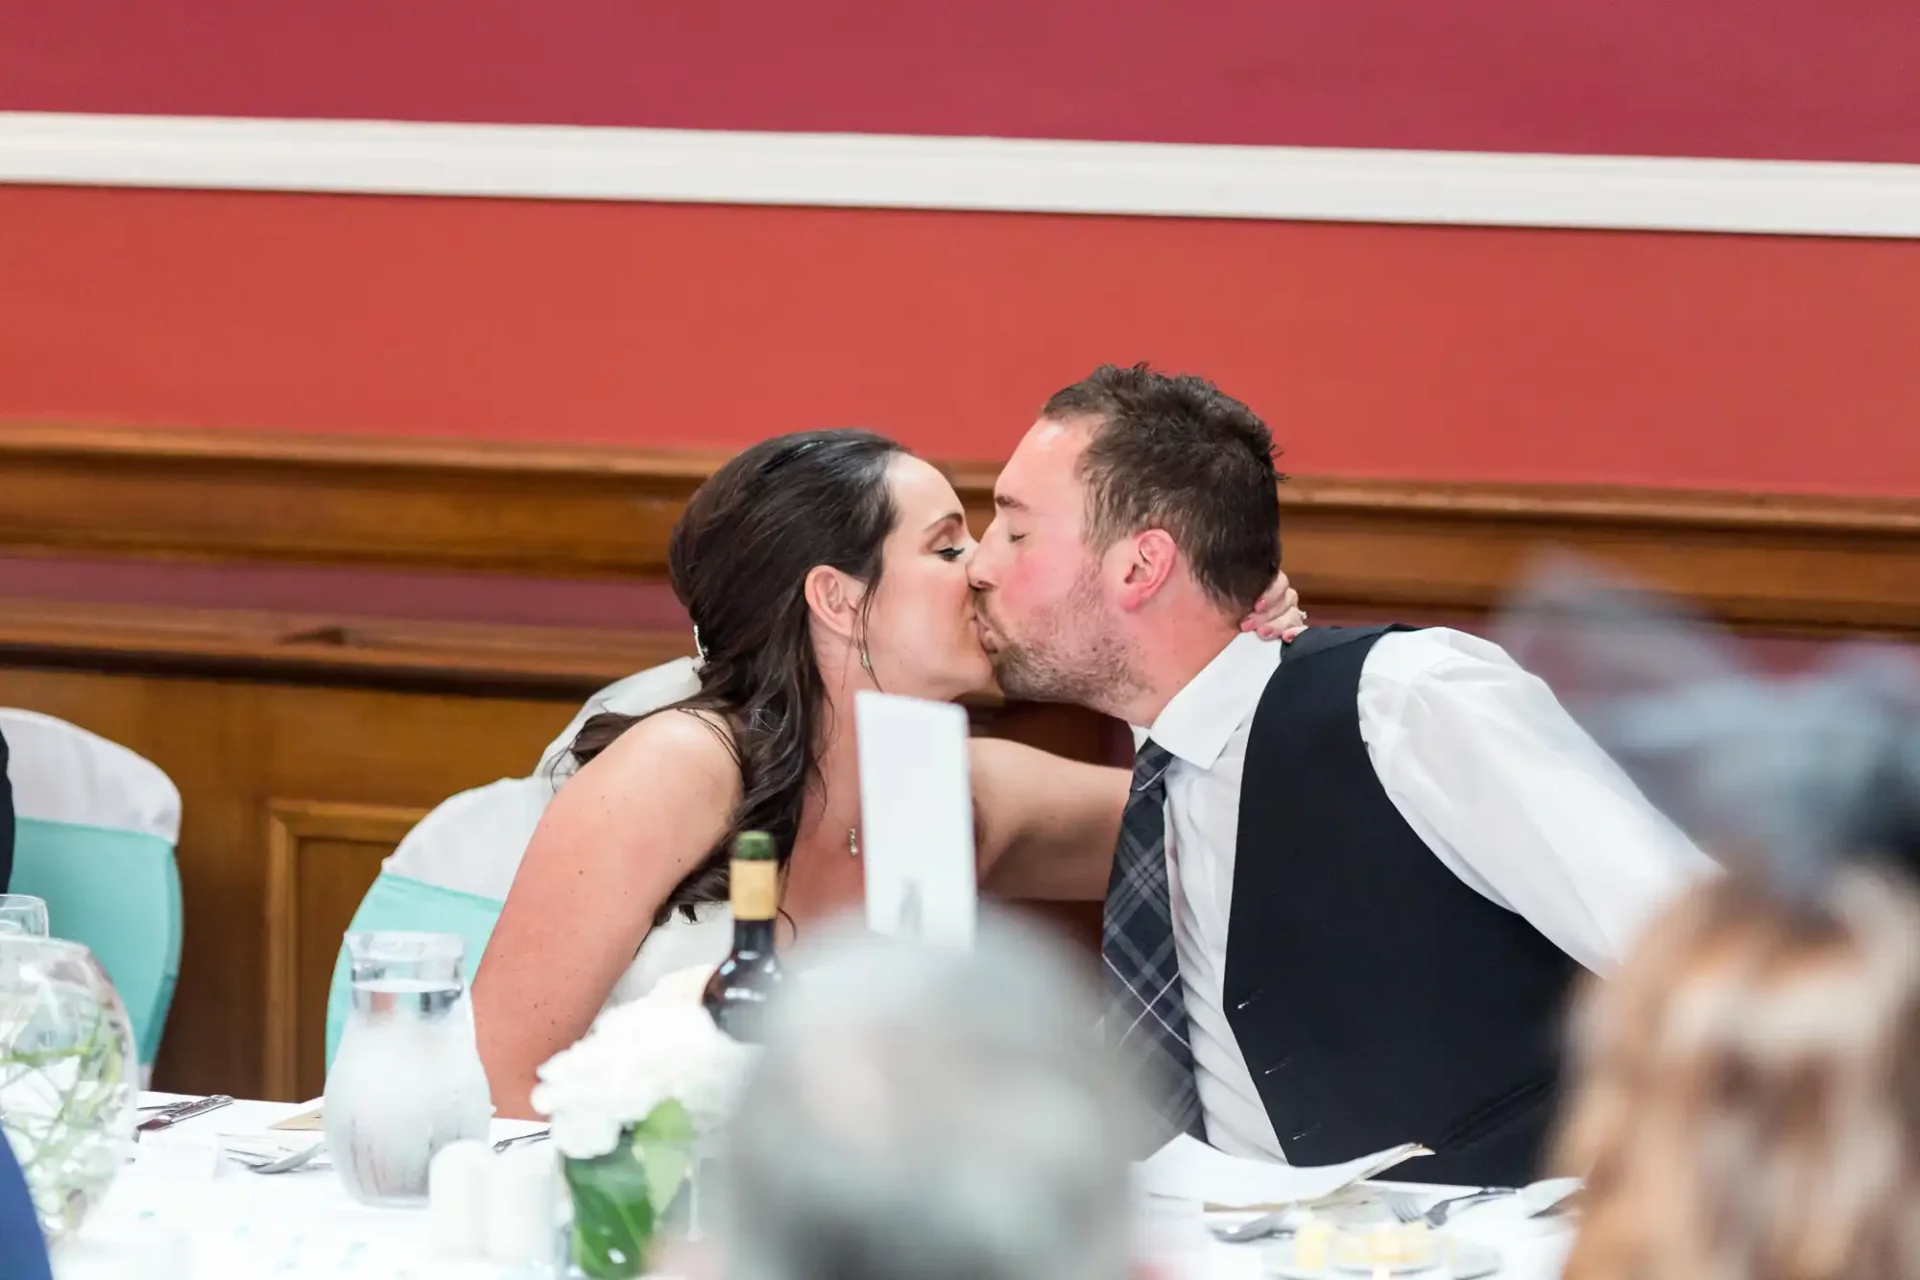 A couple in formal attire kissing at a dining table during a wedding reception, with guests and decorations blurred in the foreground.